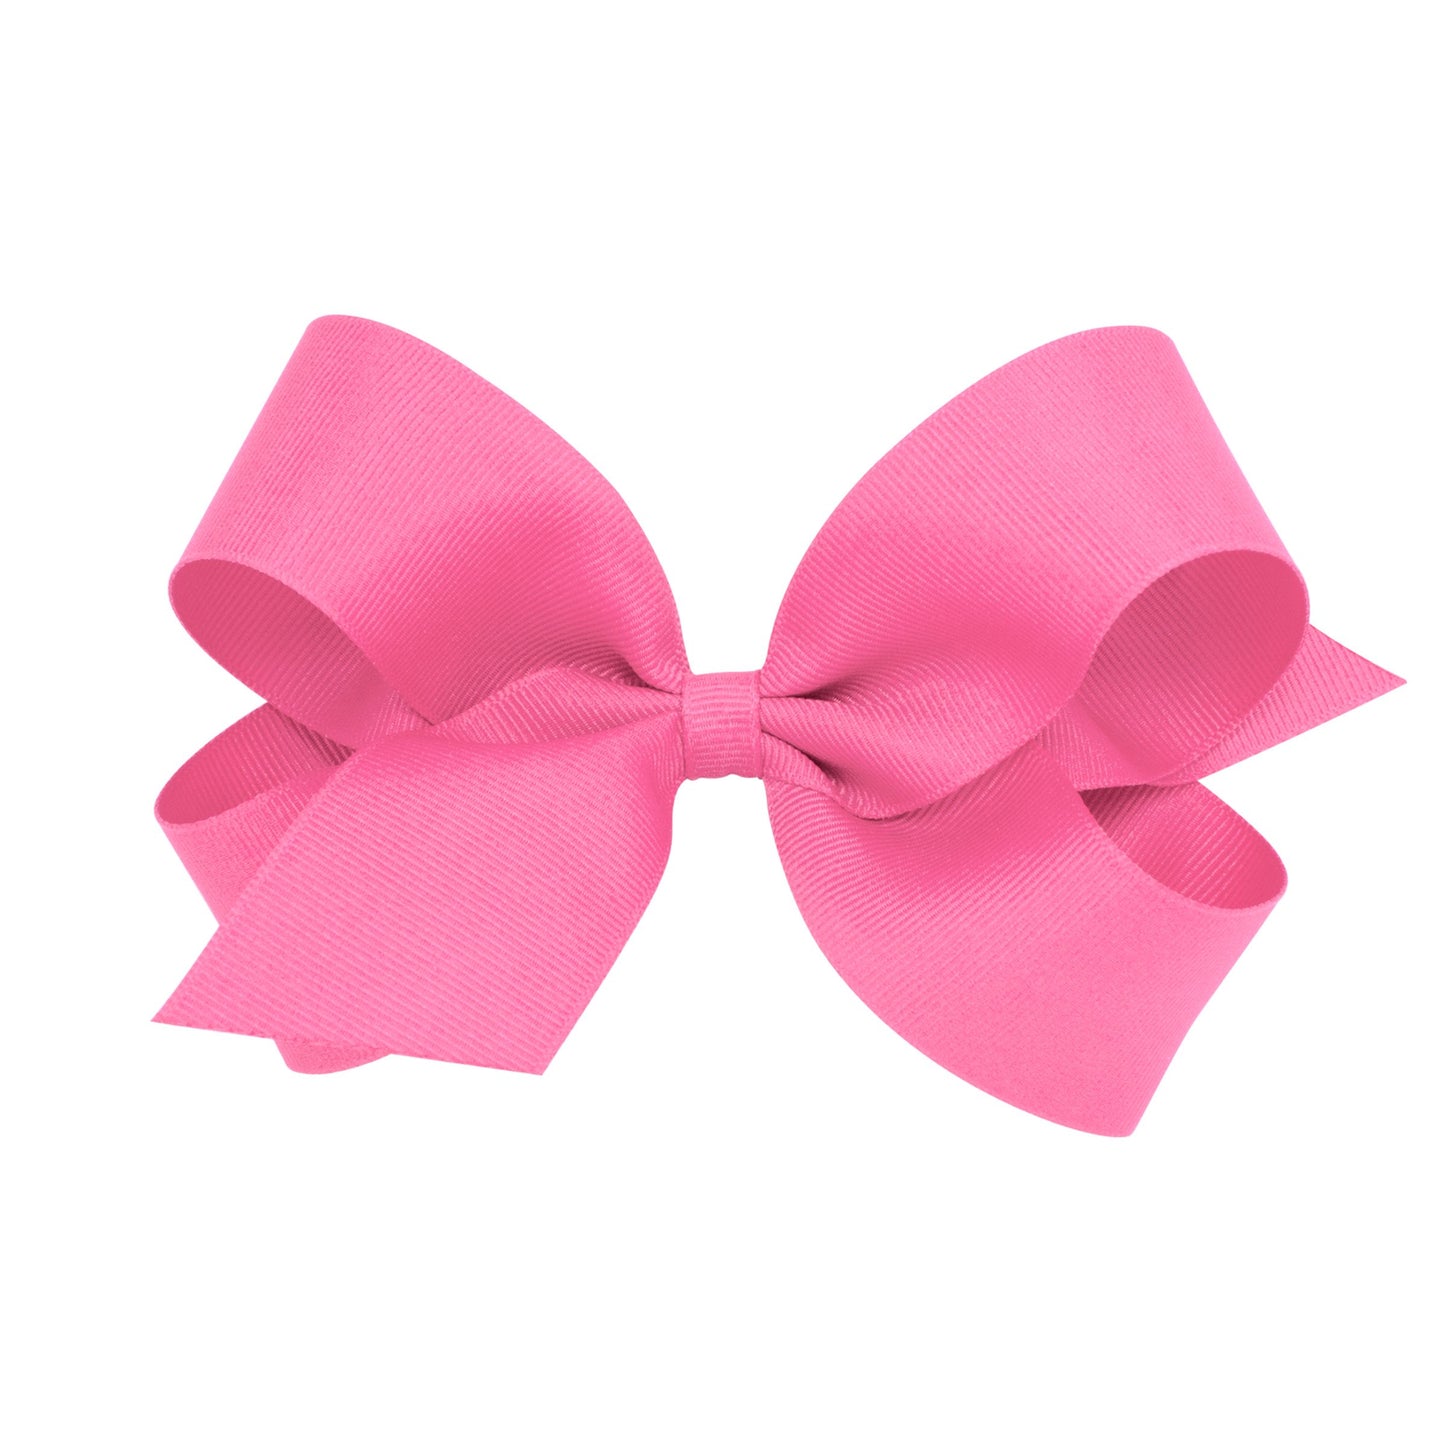 KING Grosgrain Basic Bow with Knot Wrap-MULTI COLOR (6 1/4" x 5")